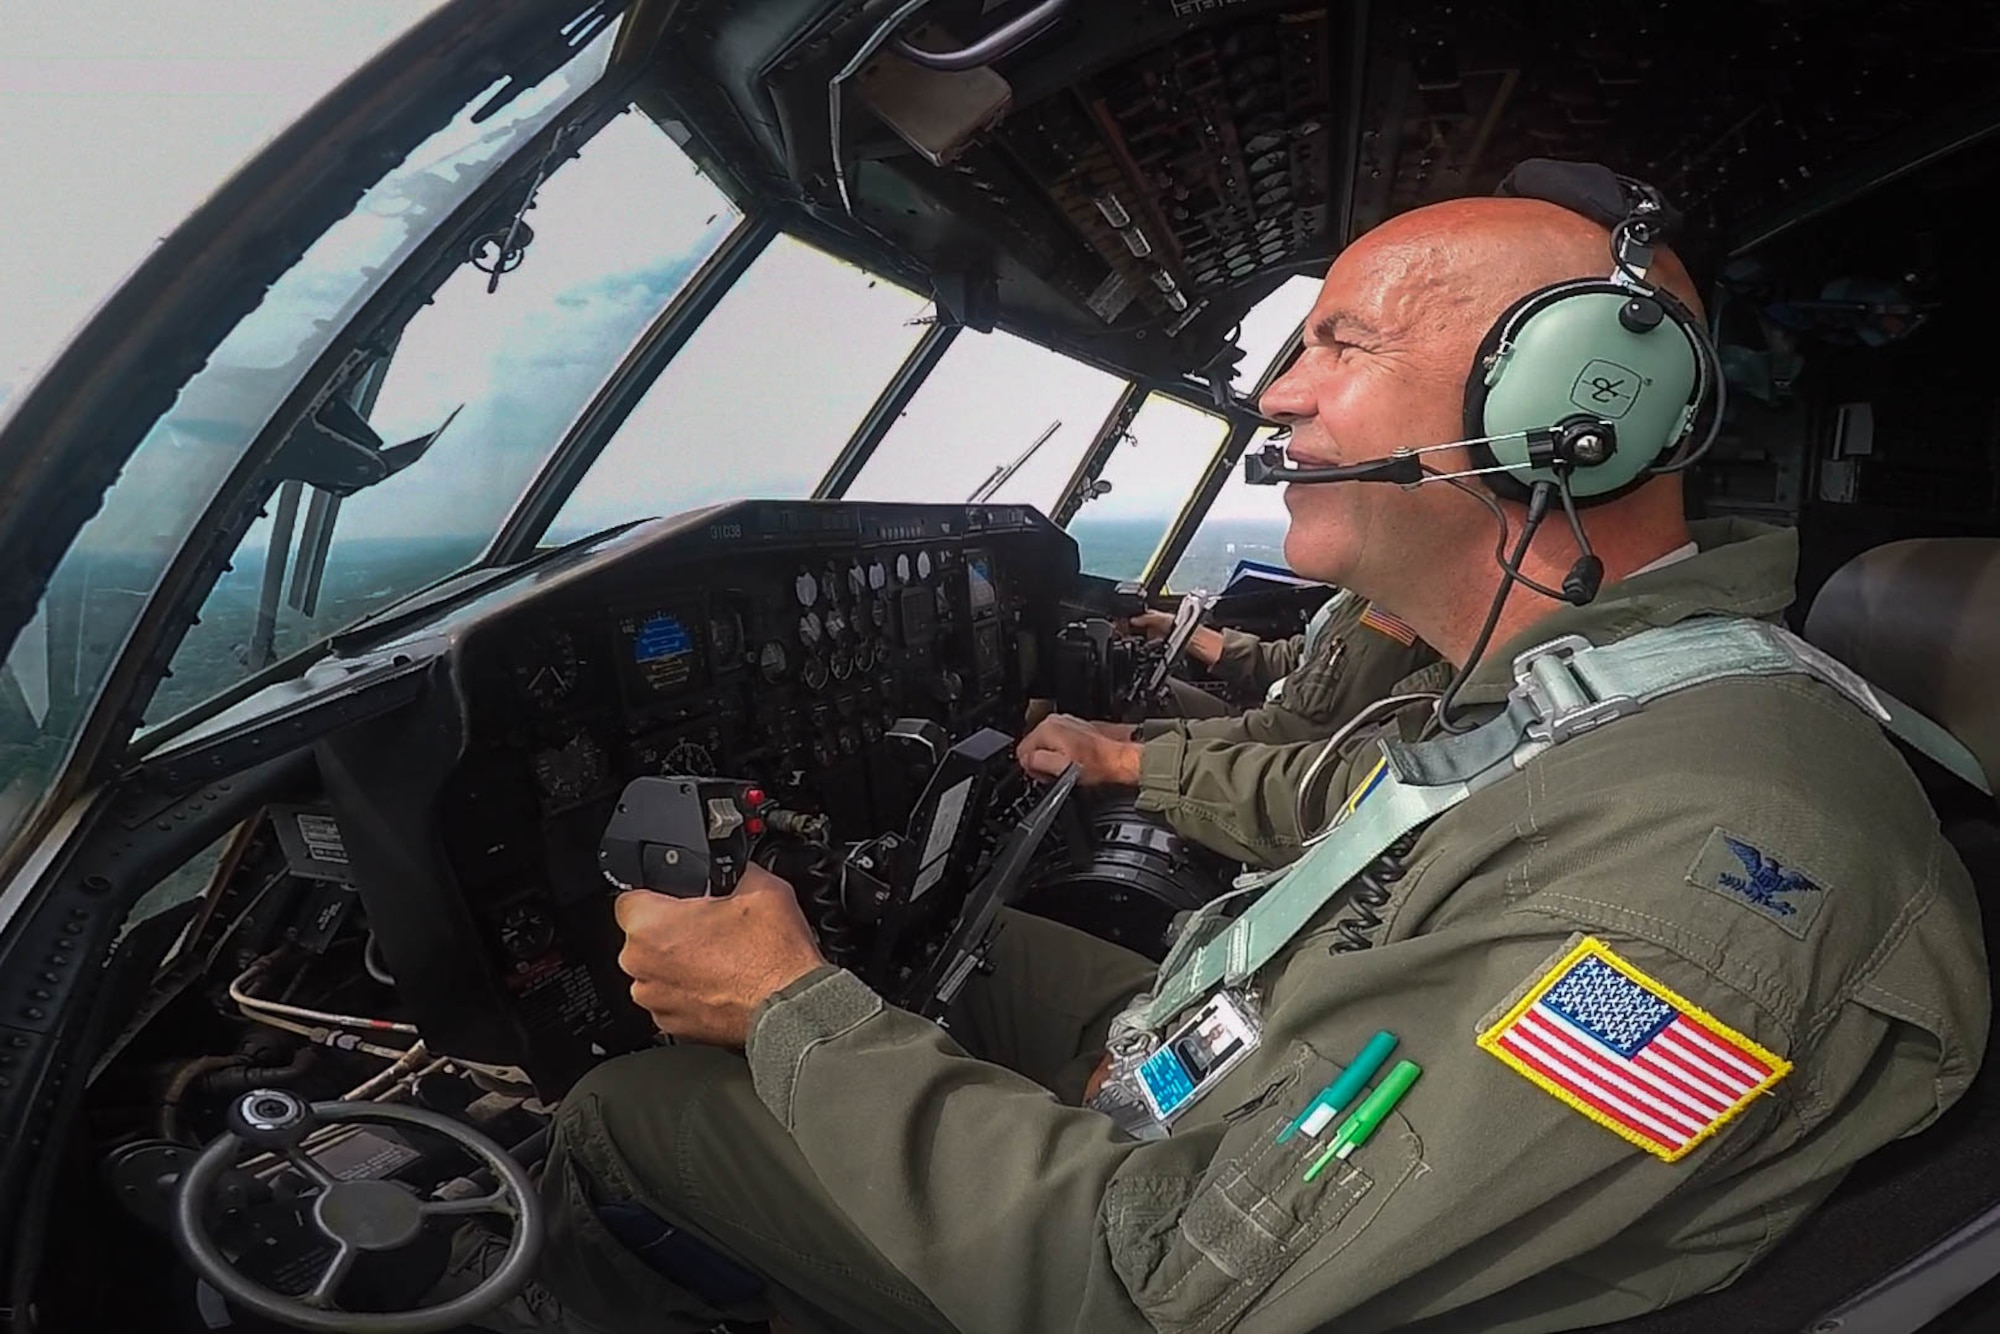 Col. Brent Merritt, 94th Airlift Wing vice commander, flies for the last time as an Air Force Reservist at Dobbins Air Reserve Base, Ga., on June 5, 2016. Merritt retired after 26 years of service to the United States Air Force. (US Air Force Photo by Senior Airman Miles Wilson) 